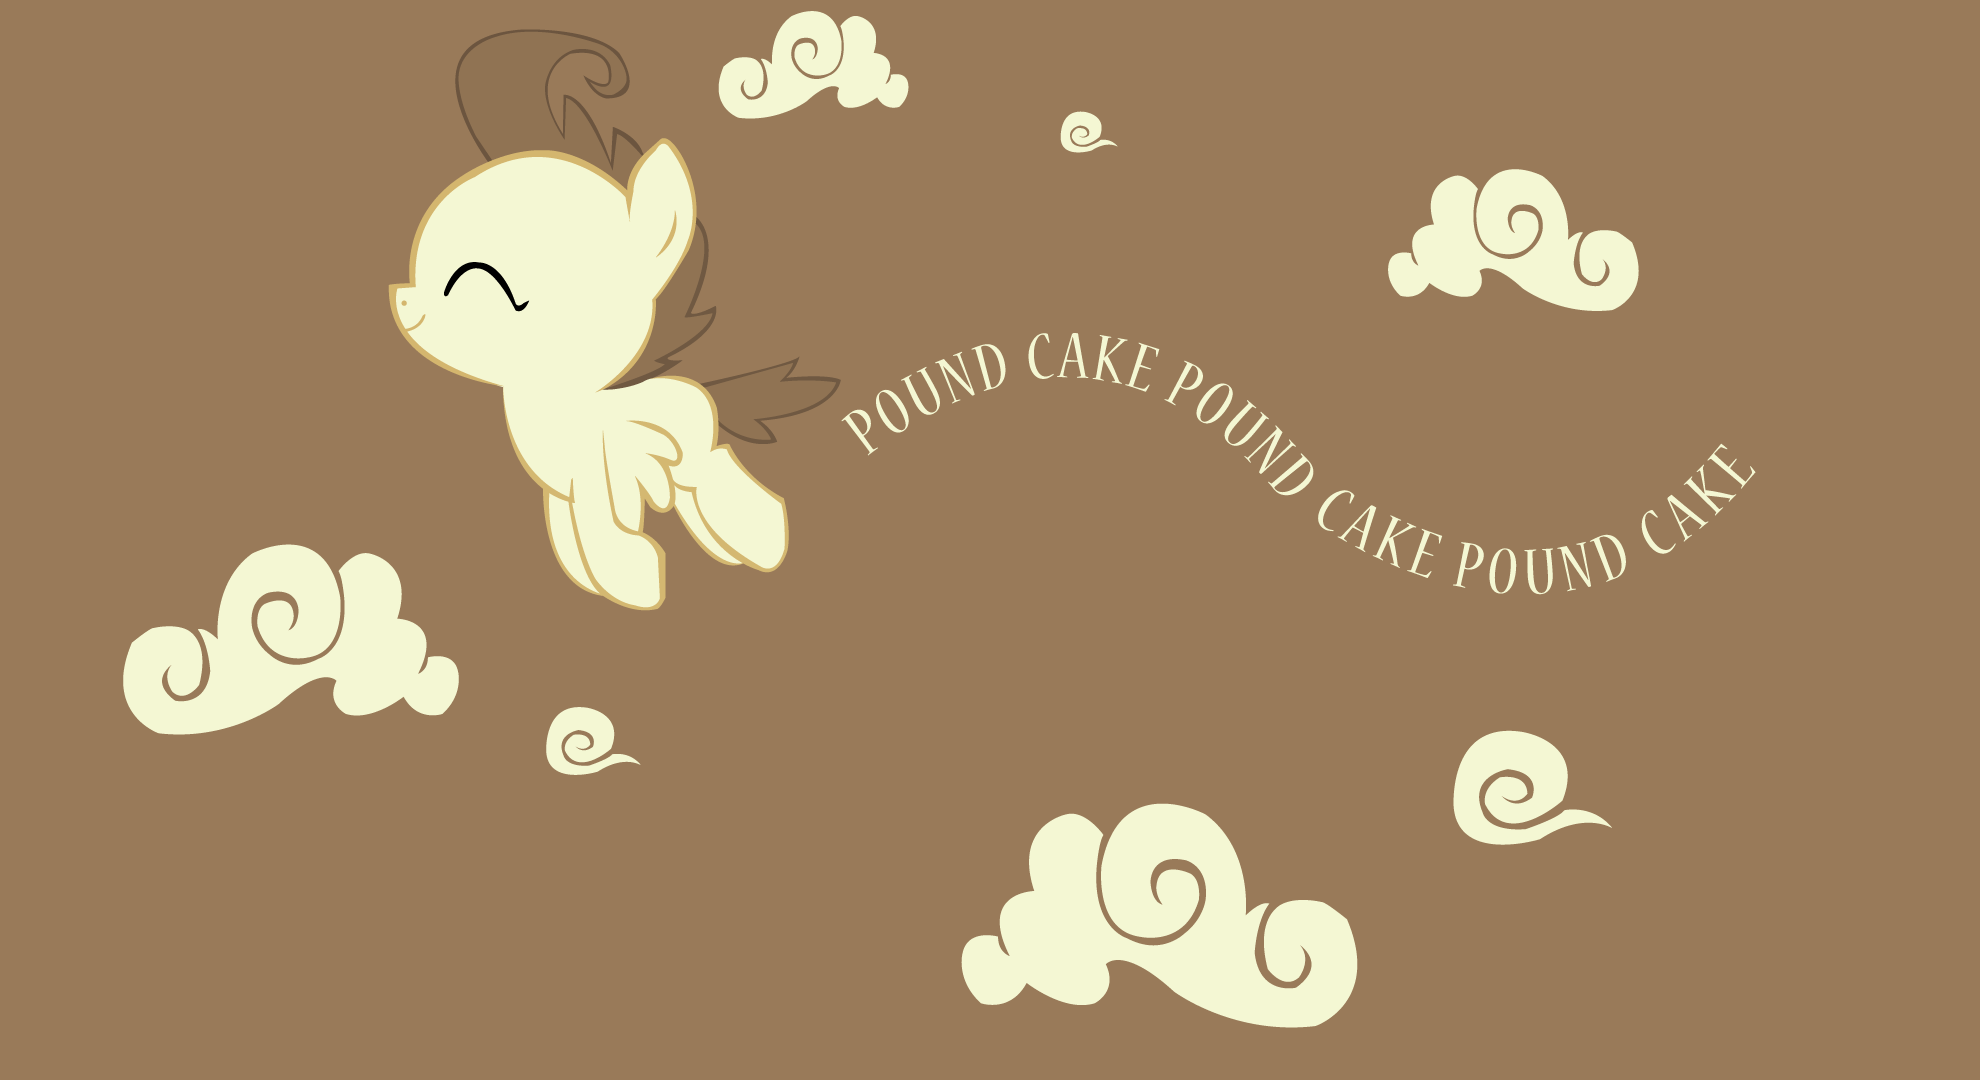 Pound Cake in the Sky by Goldfisk